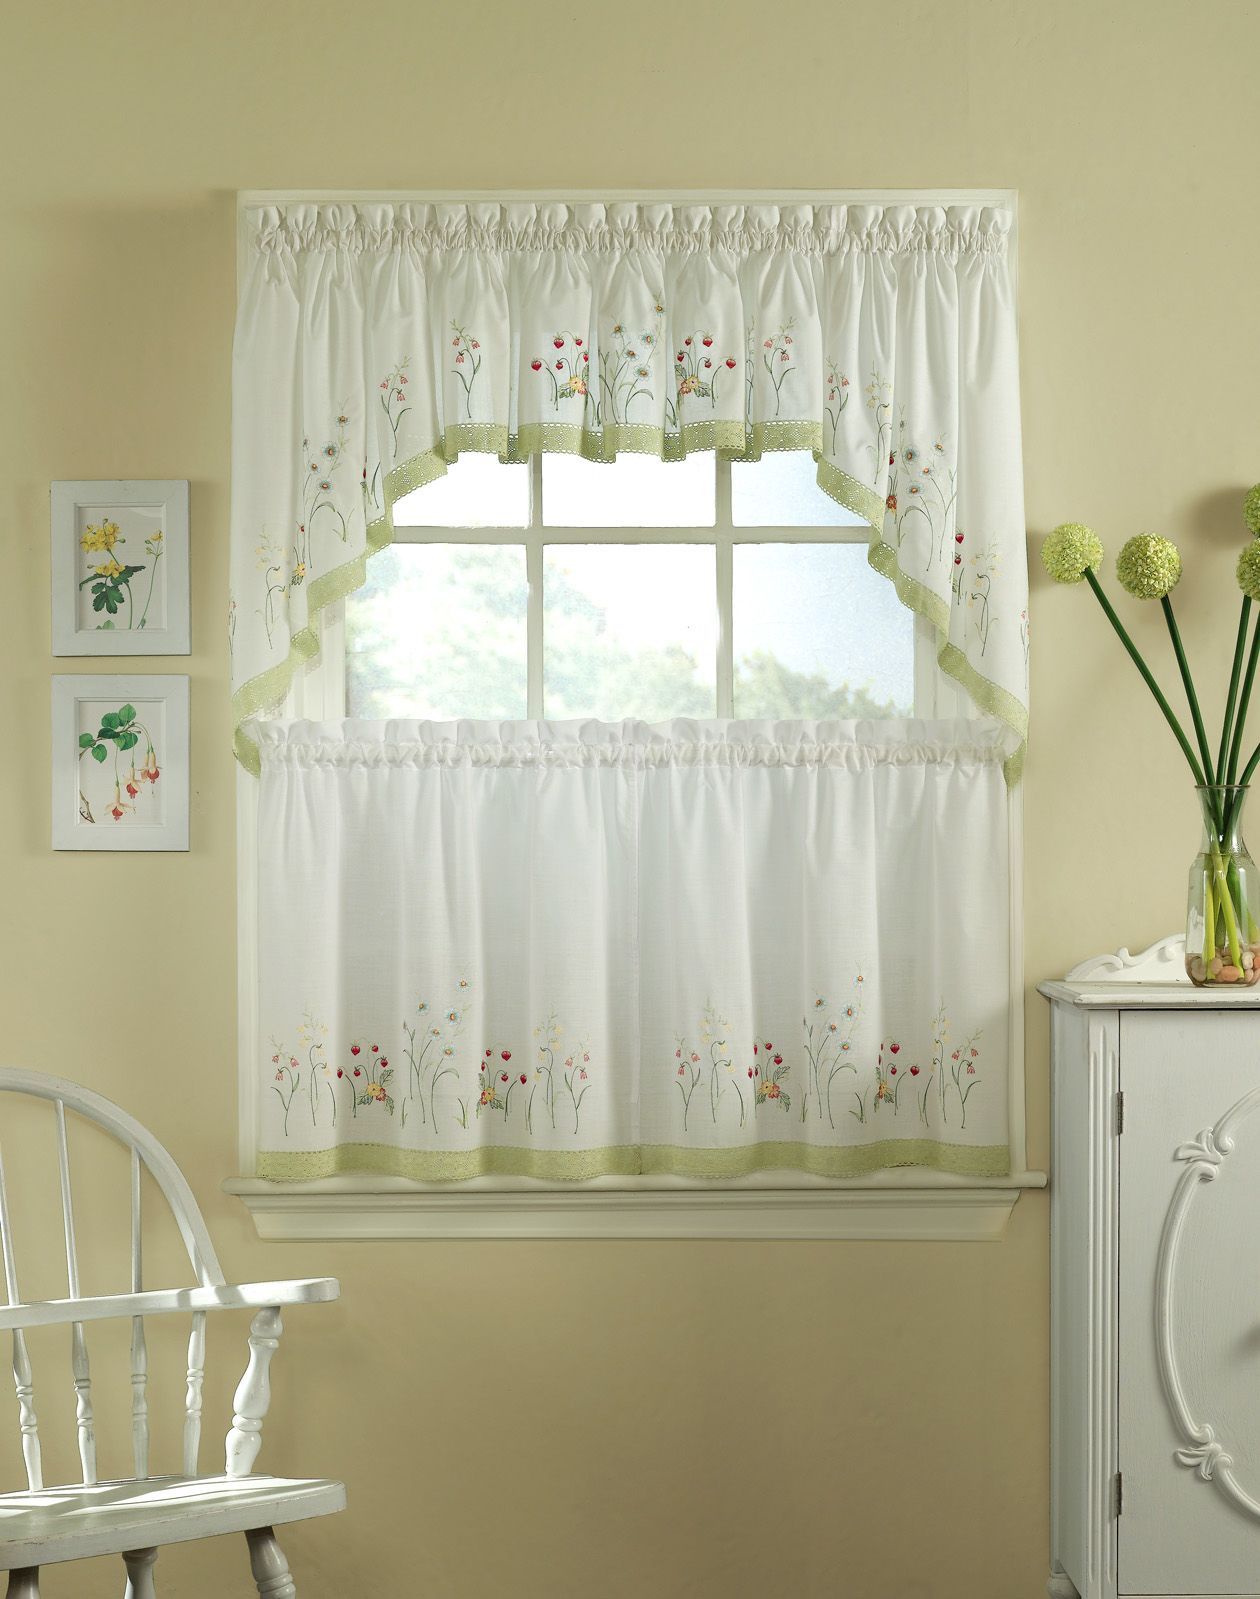 Half Window Curtains Ideas | Kitchen Curtains, Kitchen Intended For Traditional Tailored Tier And Swag Window Curtains Sets With Ornate Flower Garden Print (View 12 of 20)